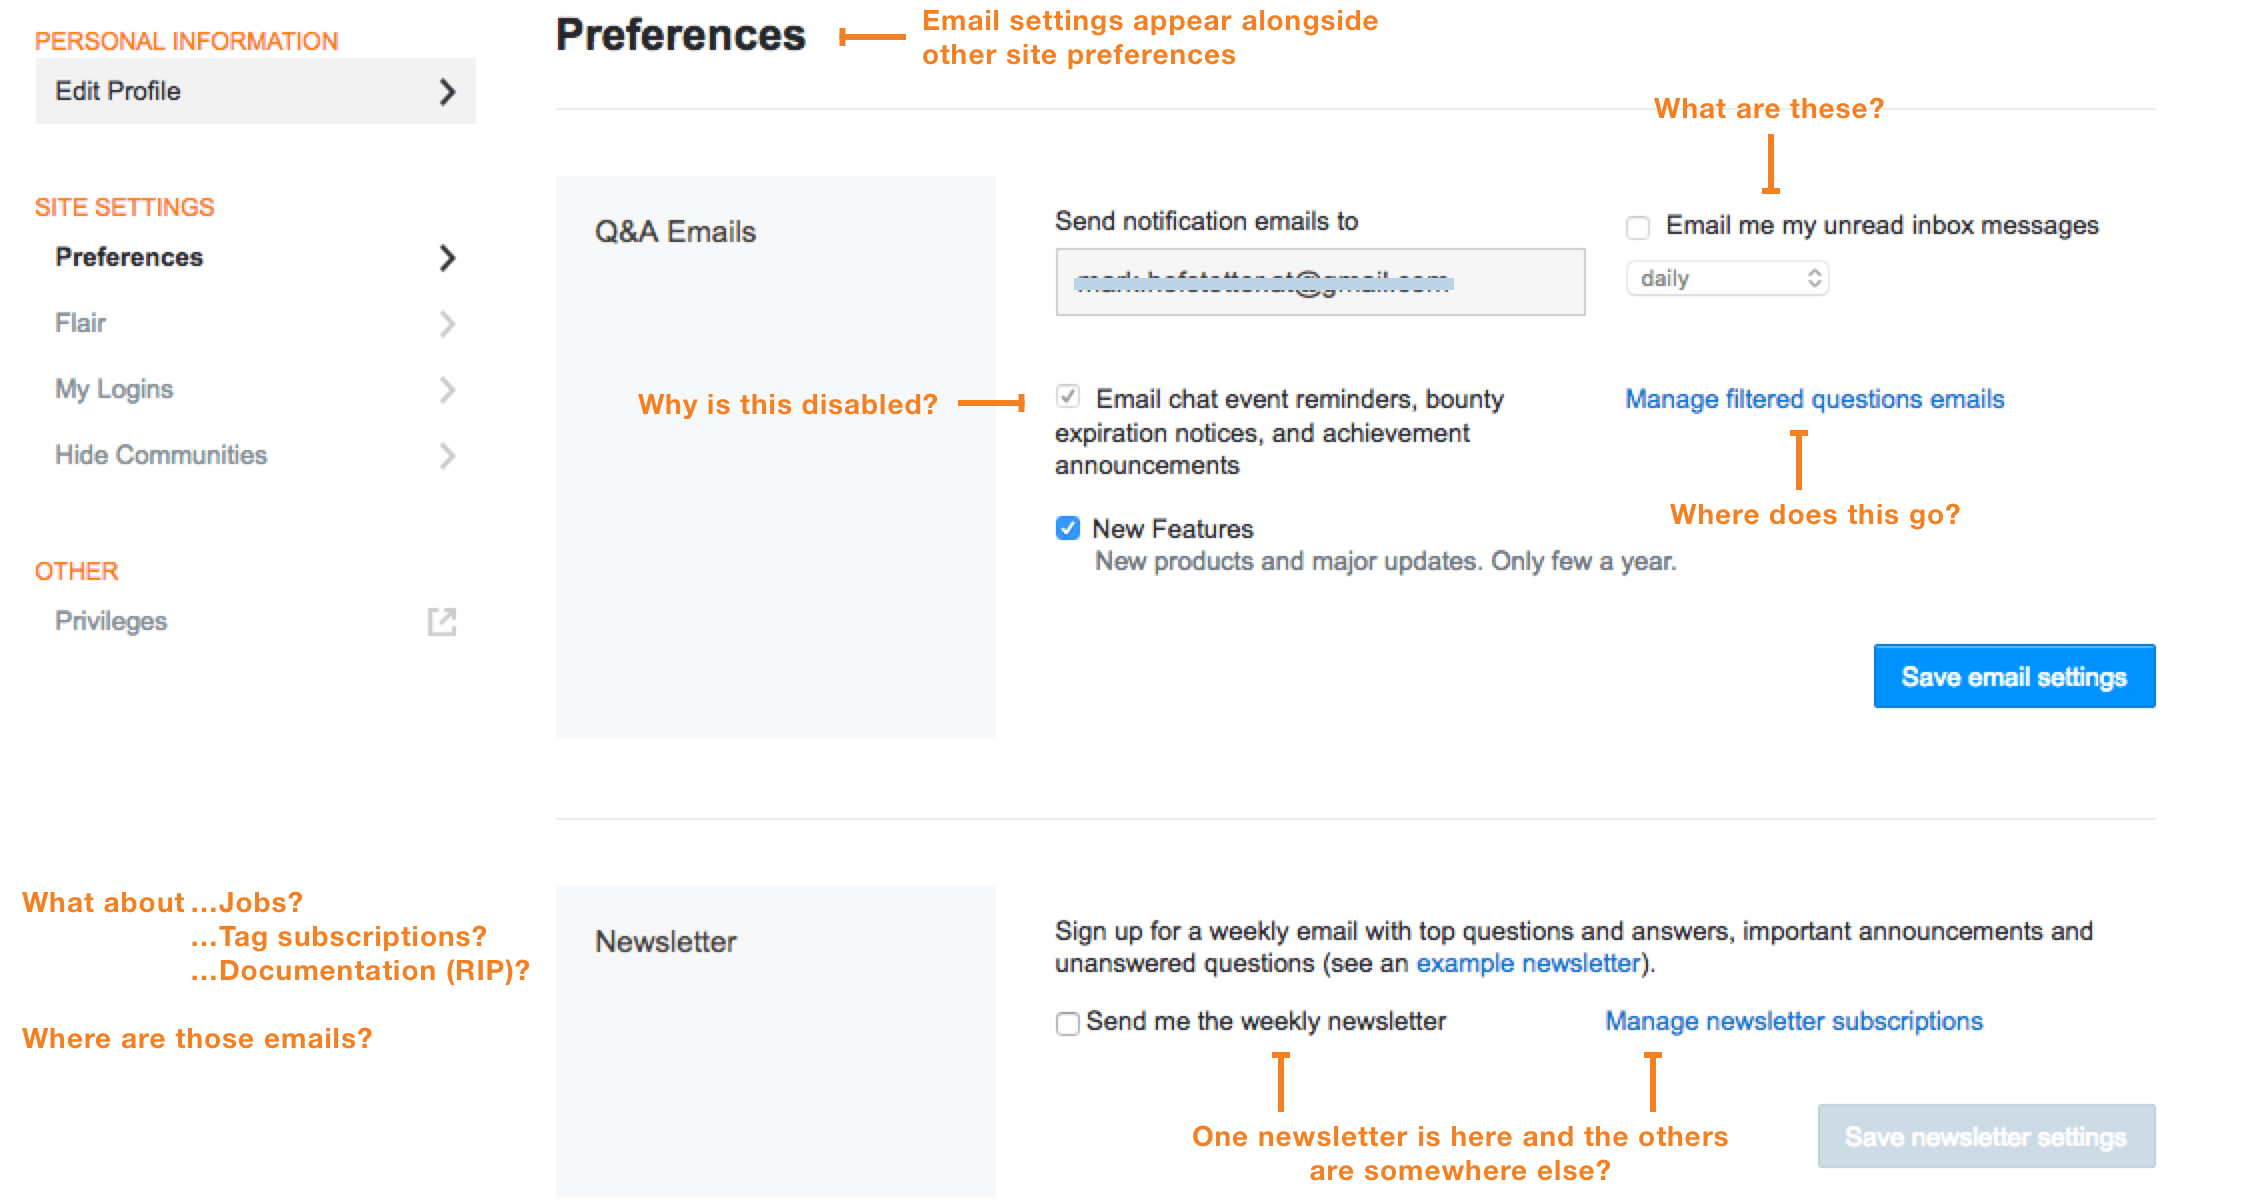 Stack Overflow's previous email preferences.